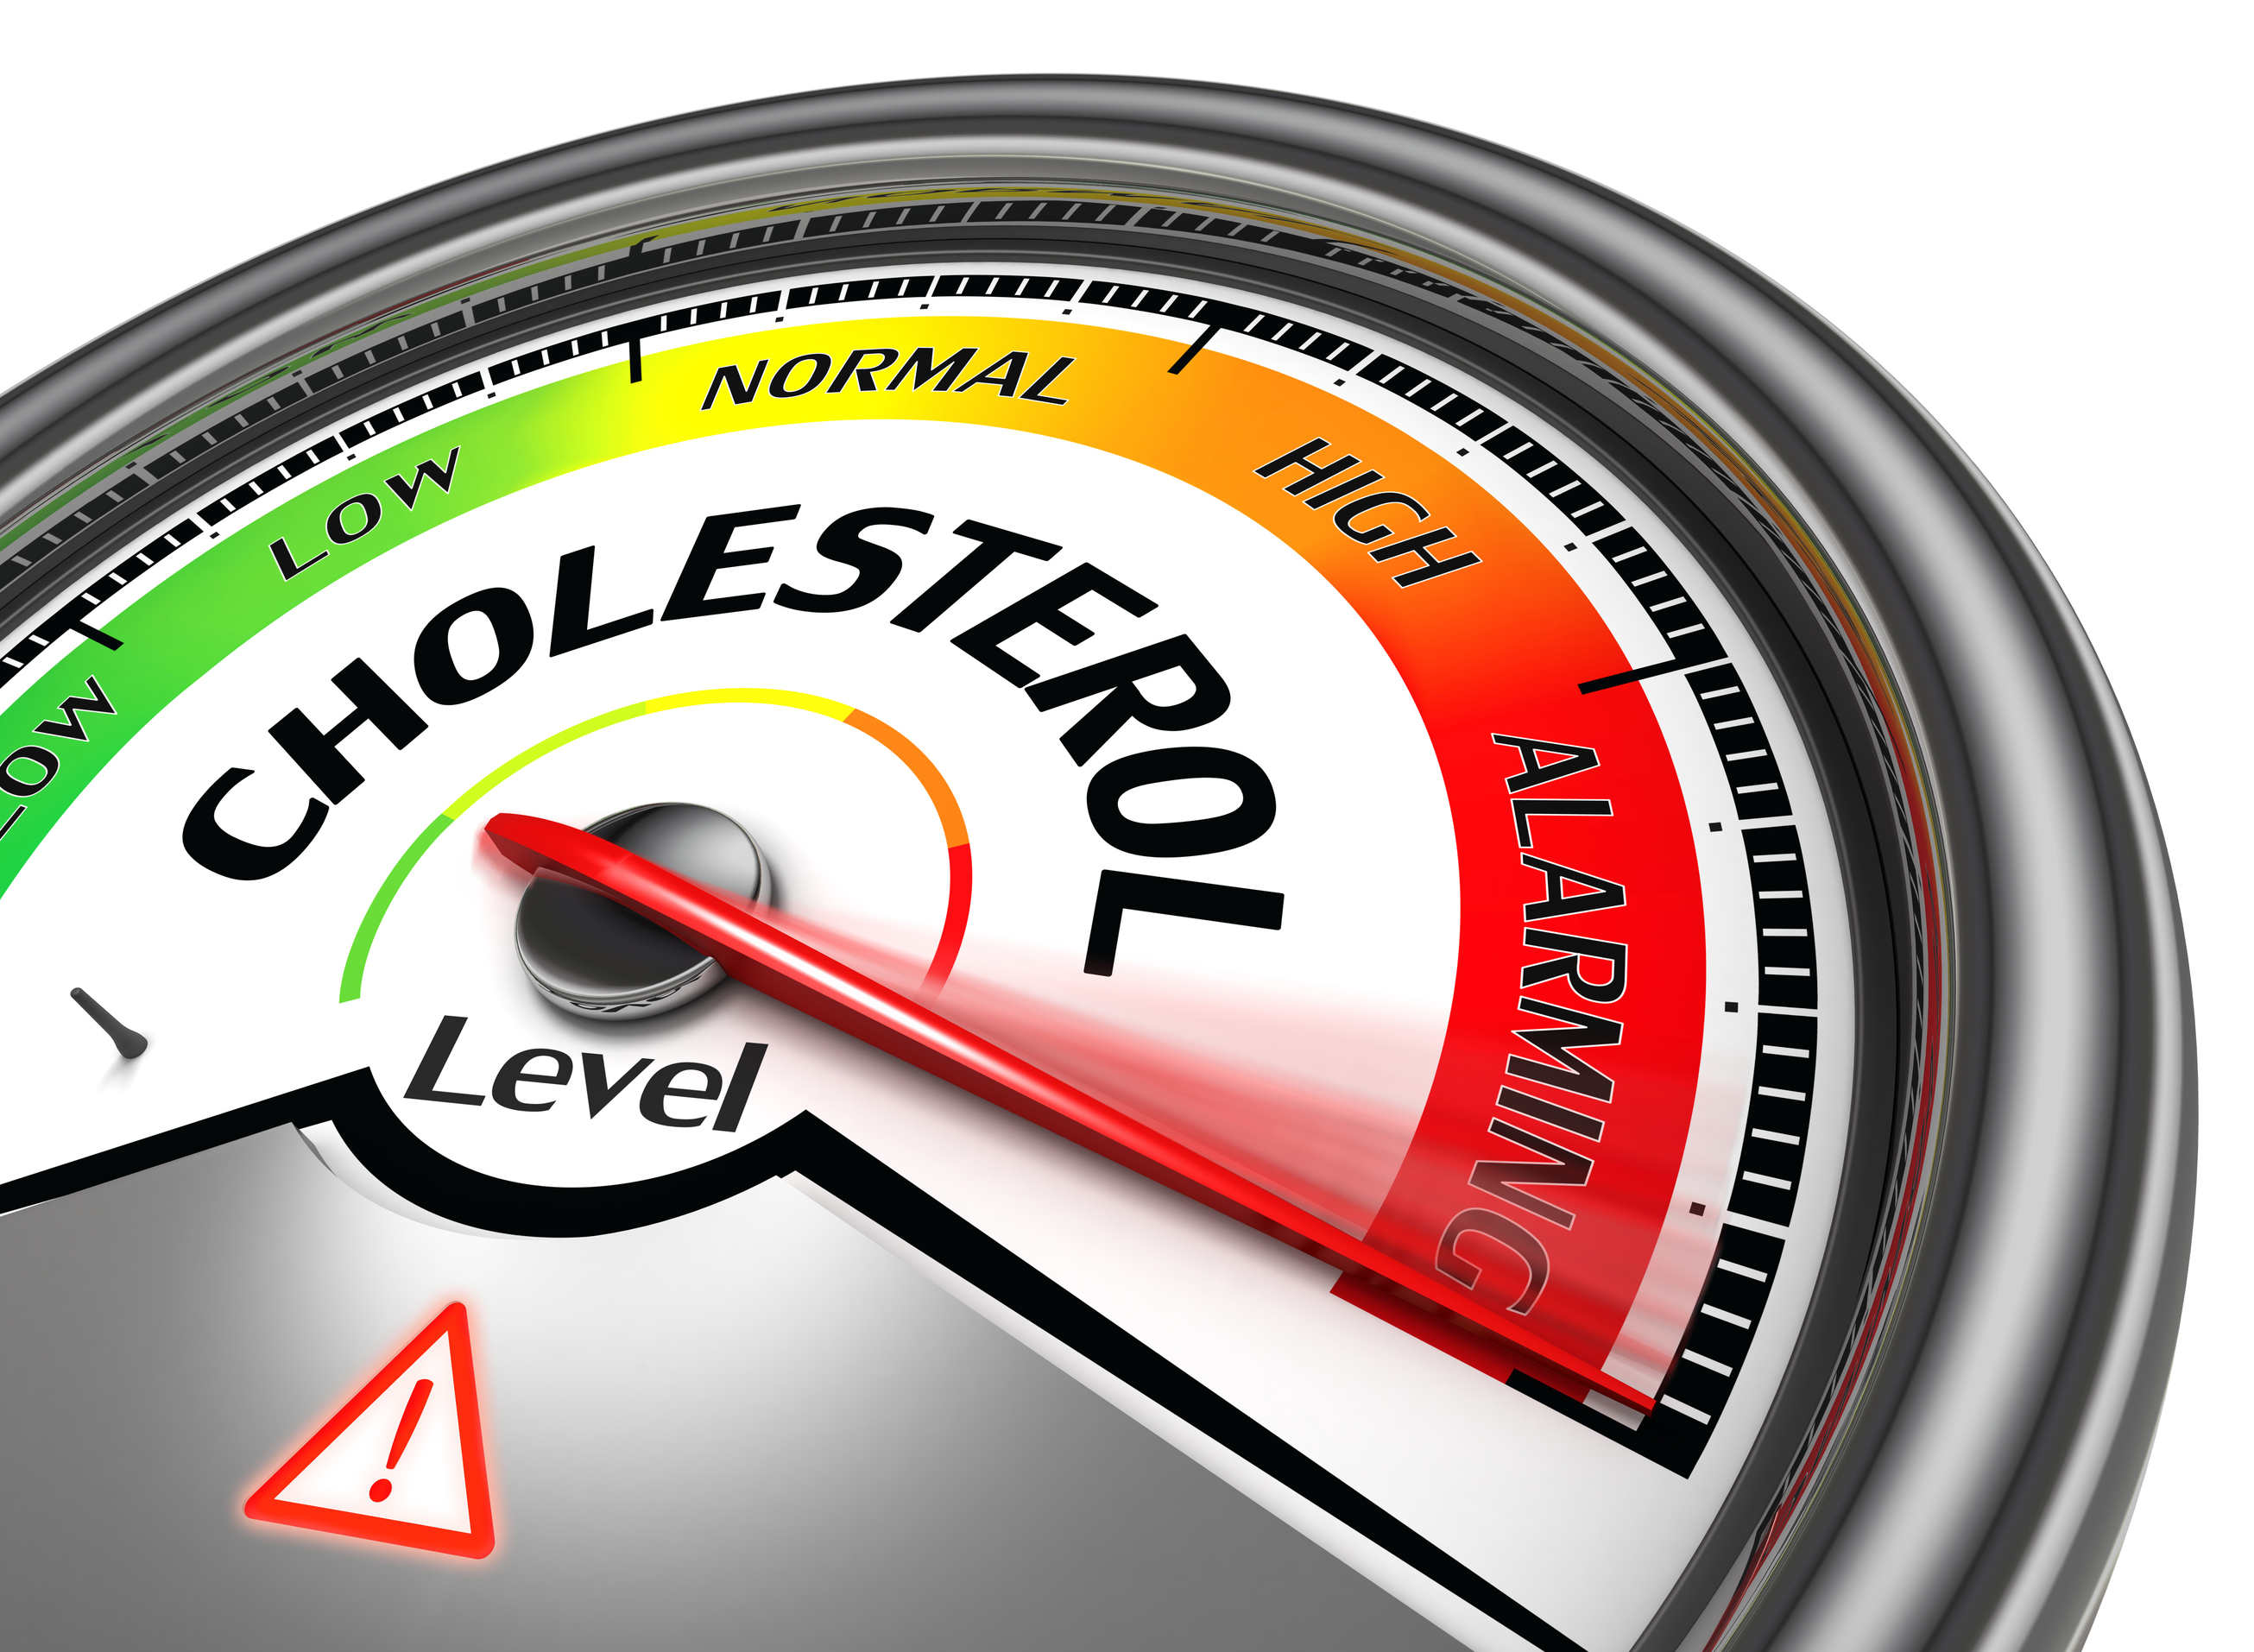 Metabolic Research Institute in West Palm Beach FL is currently enrolling qualified study participants with high cholesterol for a clinical research study.